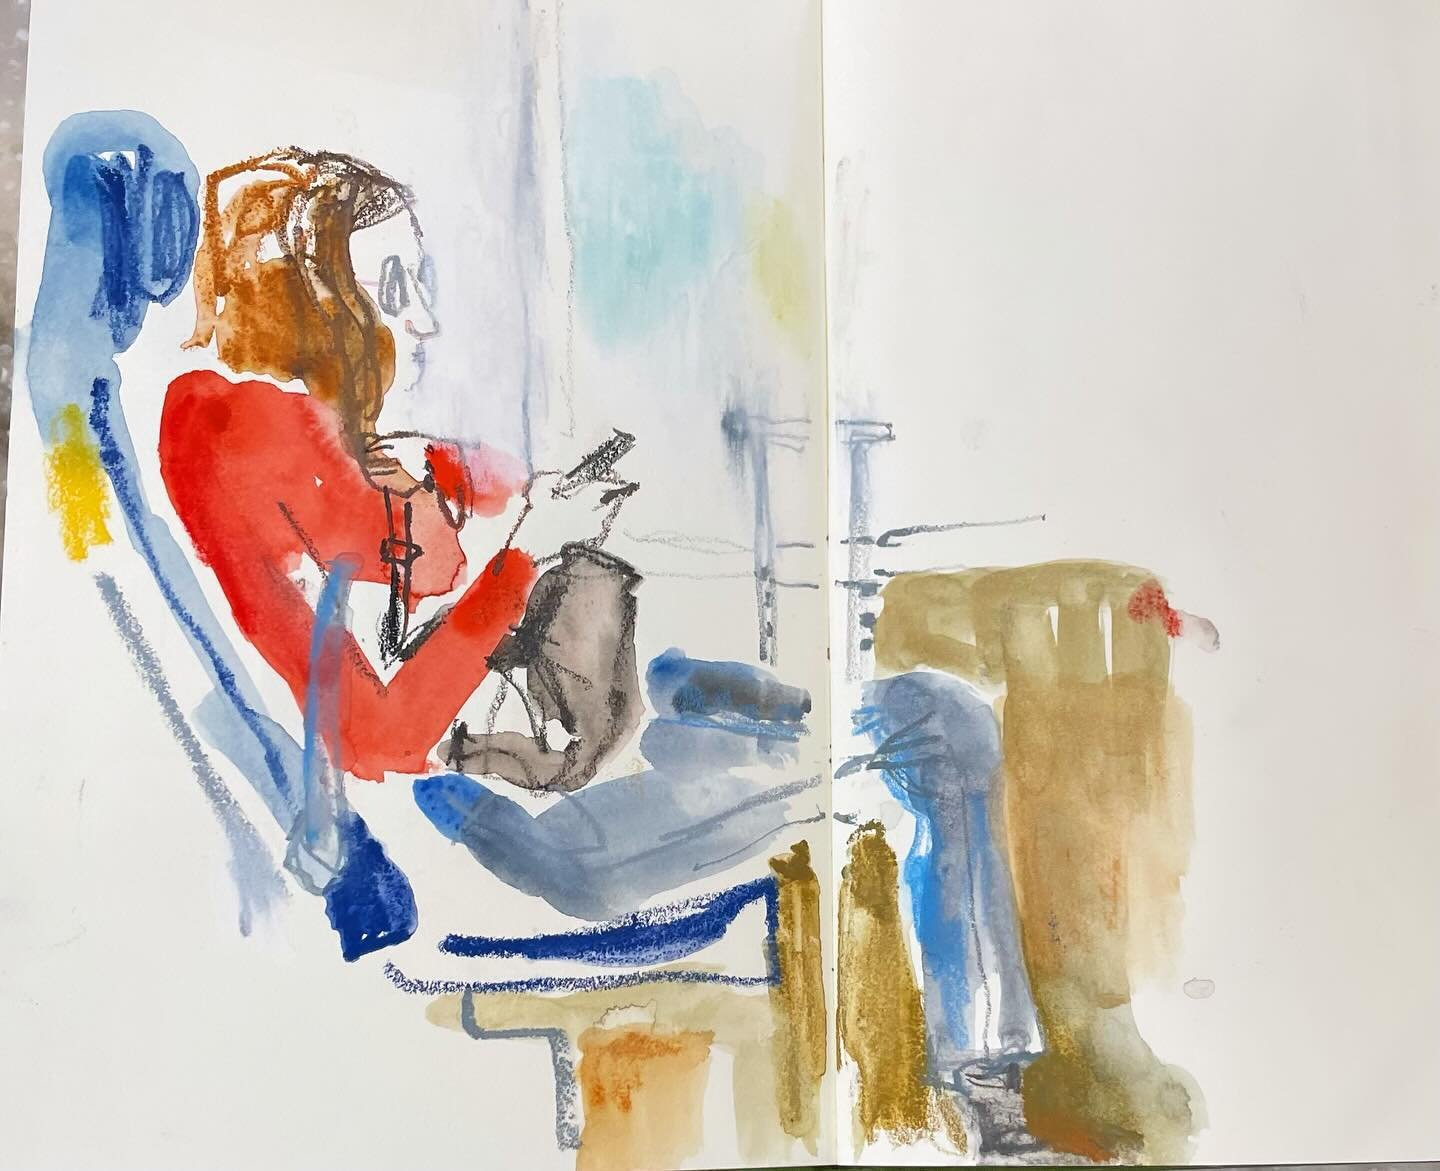 Today&rsquo;s post: my final wrap up- part of a day back in Bologna and train spotting a lady in red. Exhausted, but the good kind.  I do believe Italy is my muse. #trainspotting #ladyontrain #travel #traveljournal #sketchbook #italiansketchbook #ske